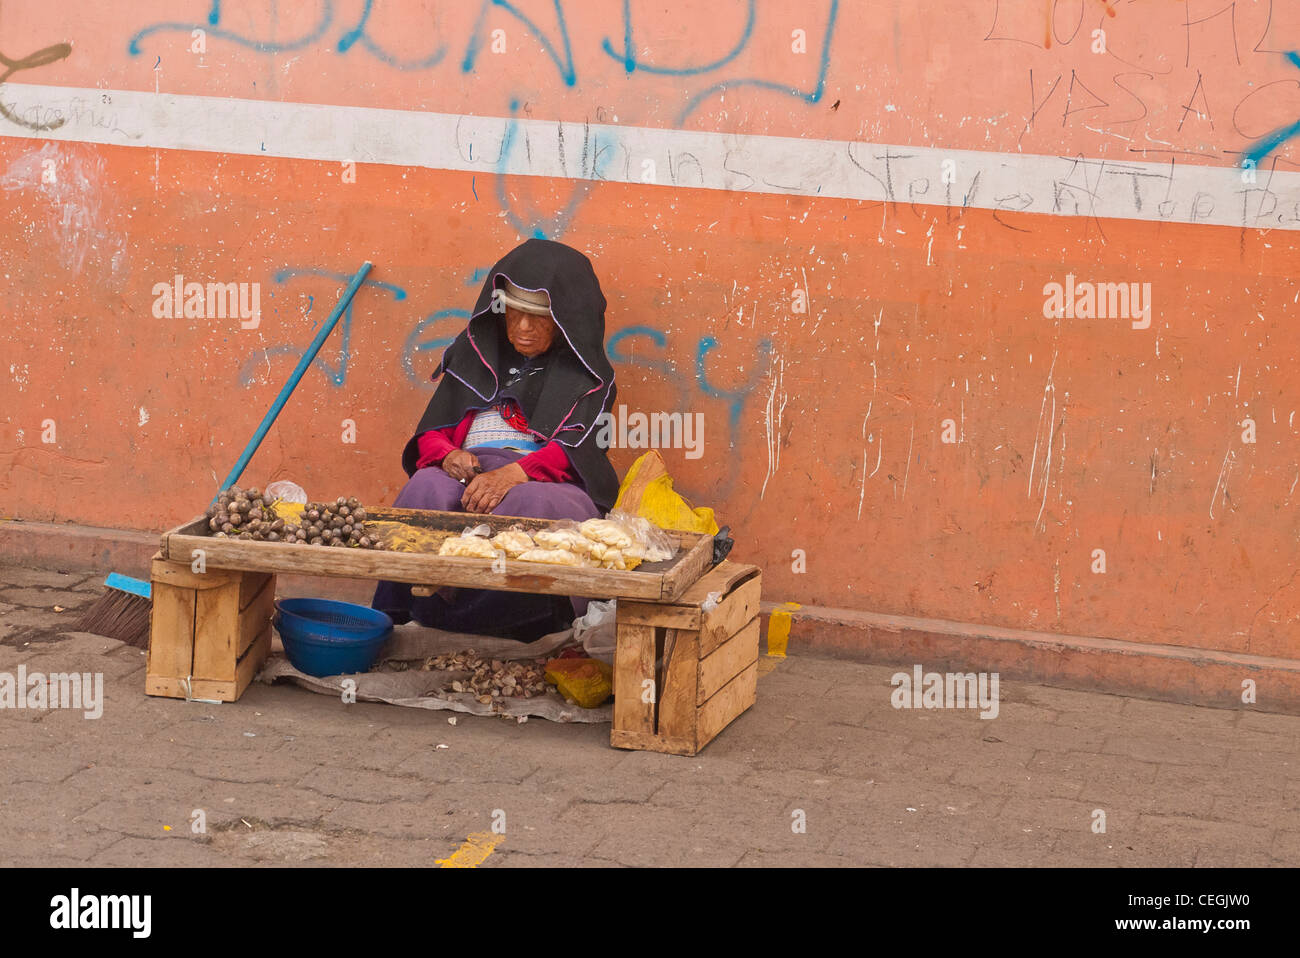 A 70-80 year old Ecuadorian Indian woman sits and dozes behind her small stall at the market in Latacunga, Ecuador. Stock Photo